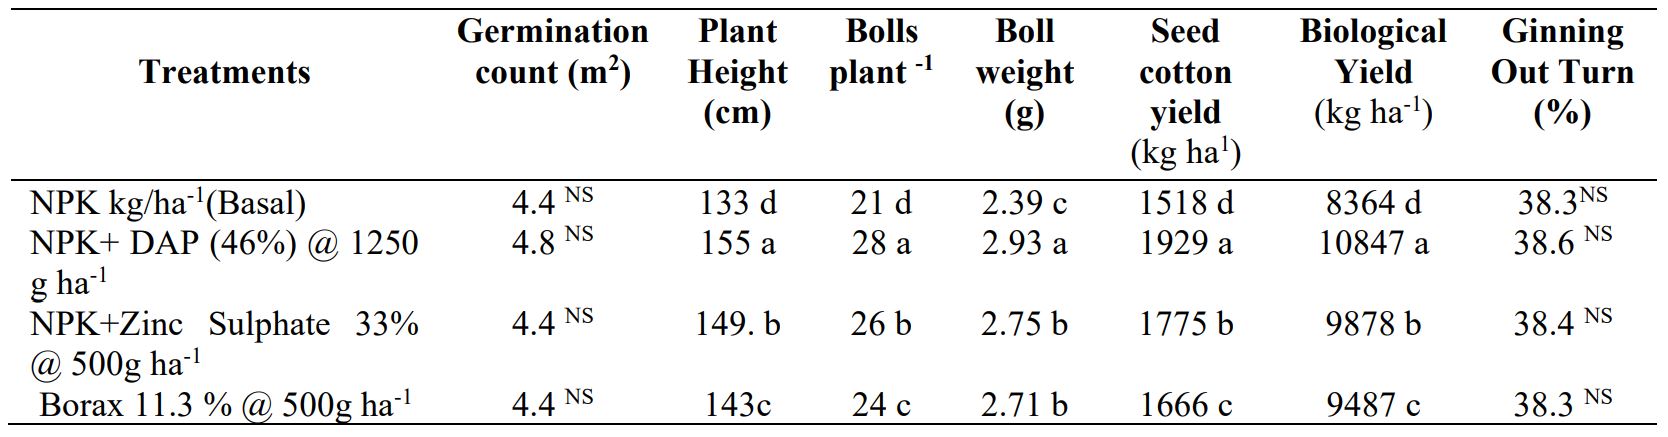 Effect of foliar application of fertilizer on cotton growth and yield attributes during Kharif-2018